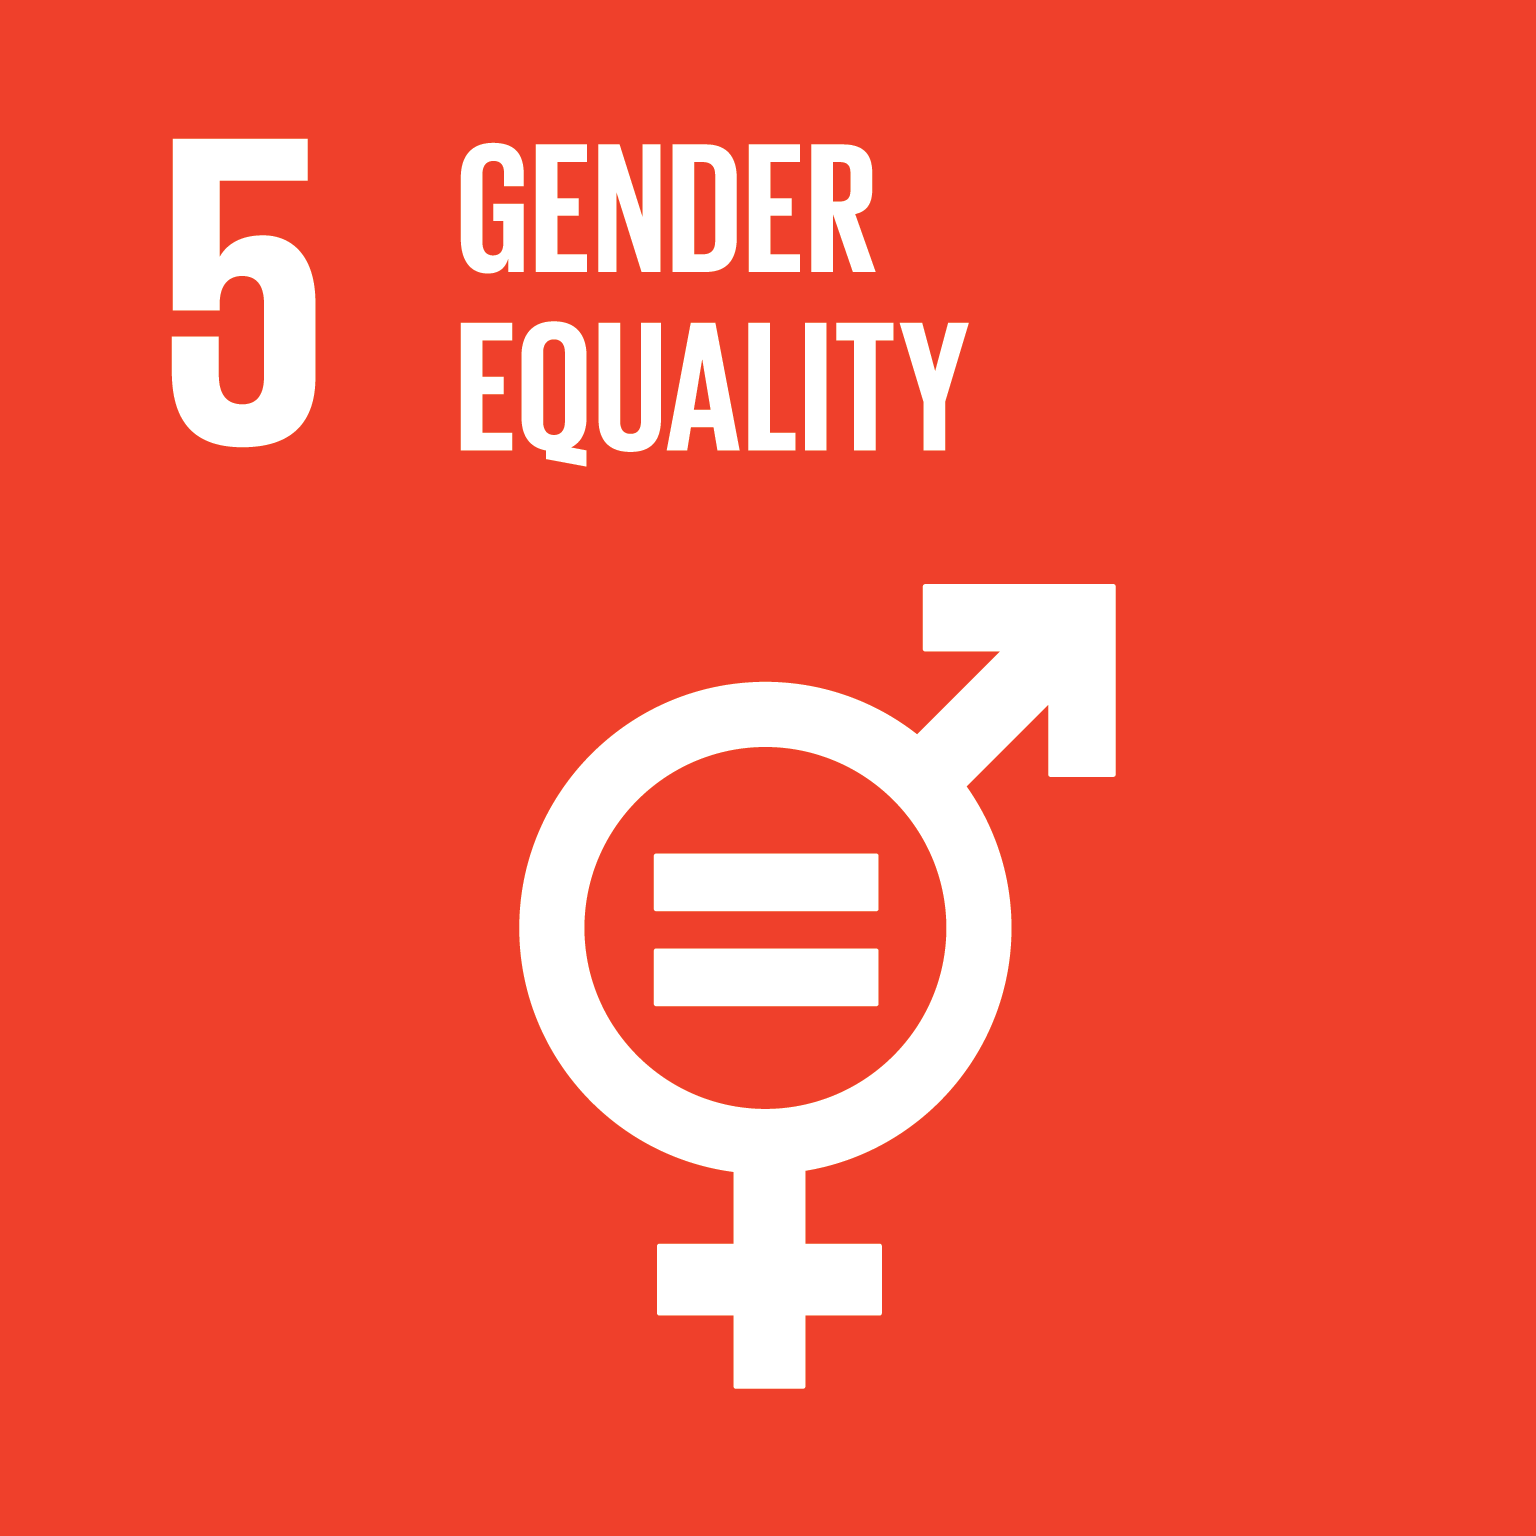 Goal 5: Gender Equality, the text of this infographic is listed below